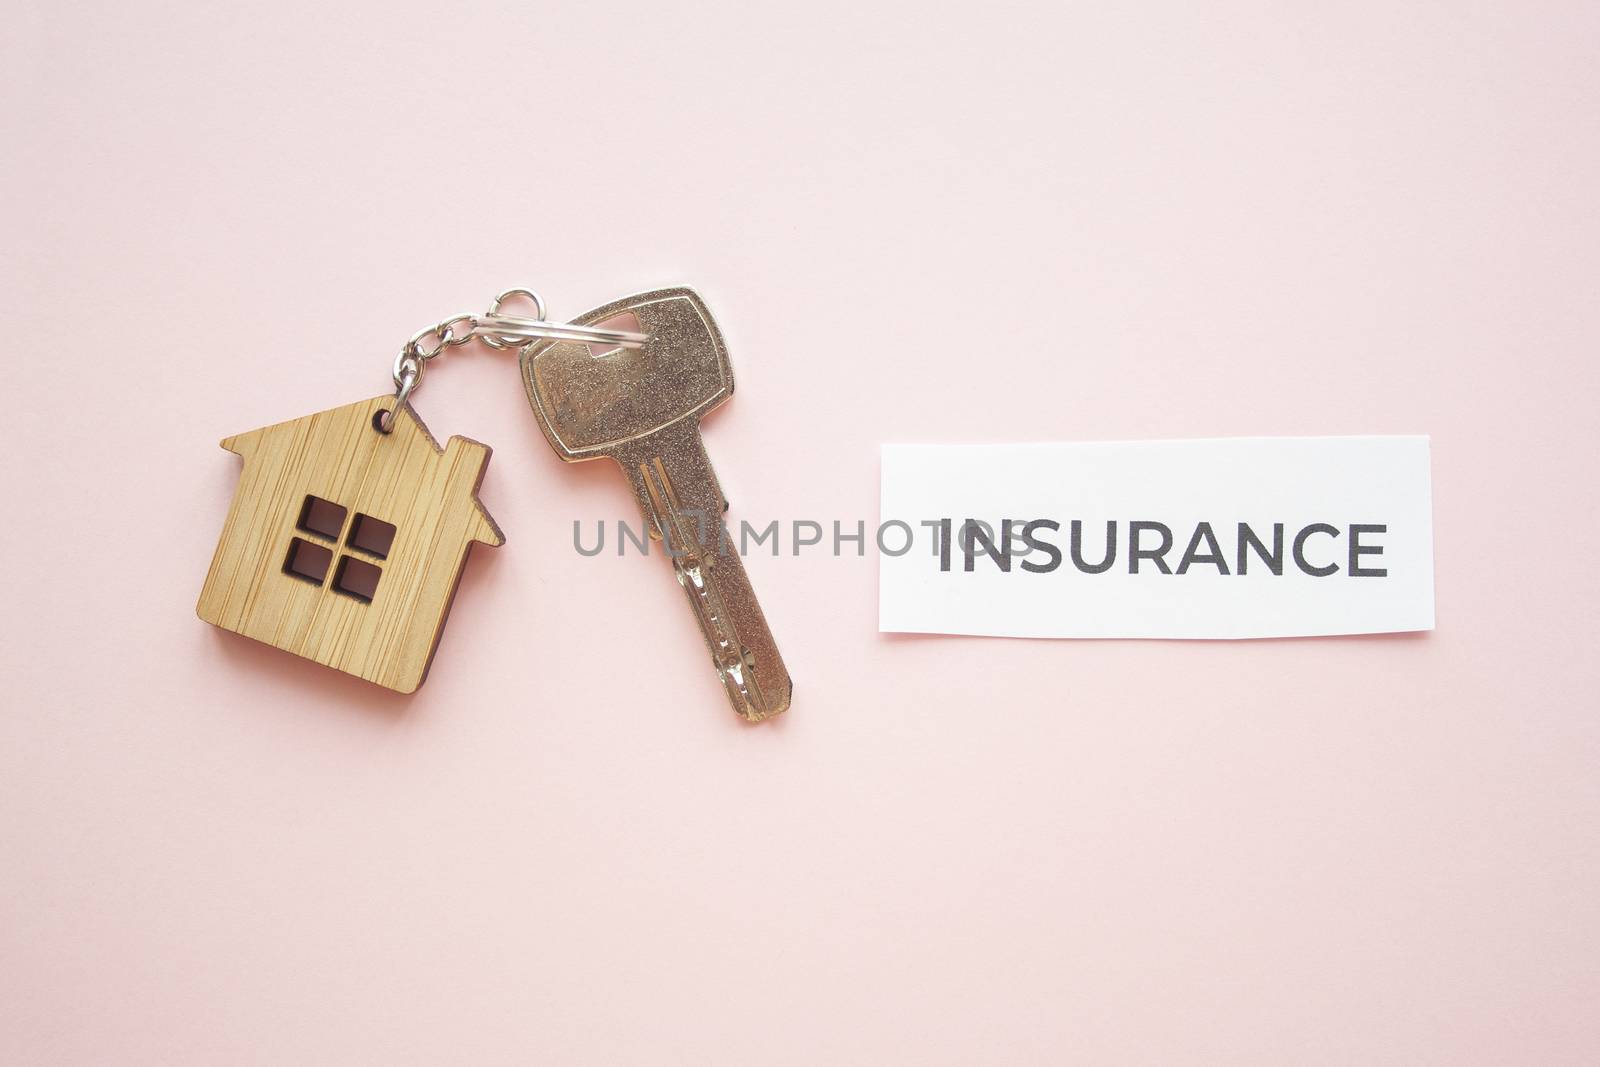 Wooden house toy and silver key on bright pink background with phrase quote Insurance. Mortgage, house buy sell, investment, rent, realtor concept